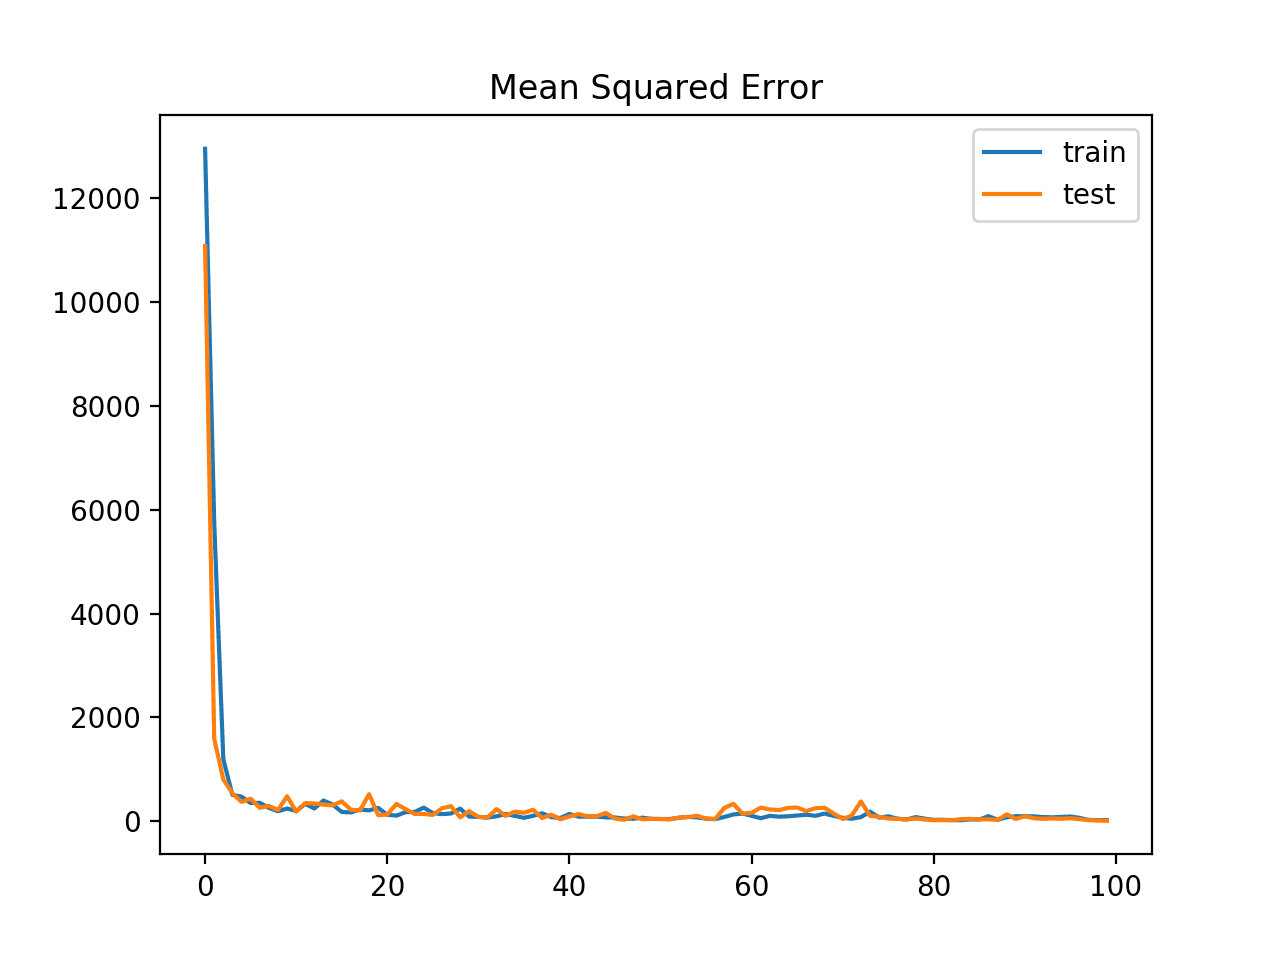 Line Plot of Mean Squared Error Loss for the Train (blue) and Test (orange) Datasets Over Training Epochs With Gradient Value Clipping